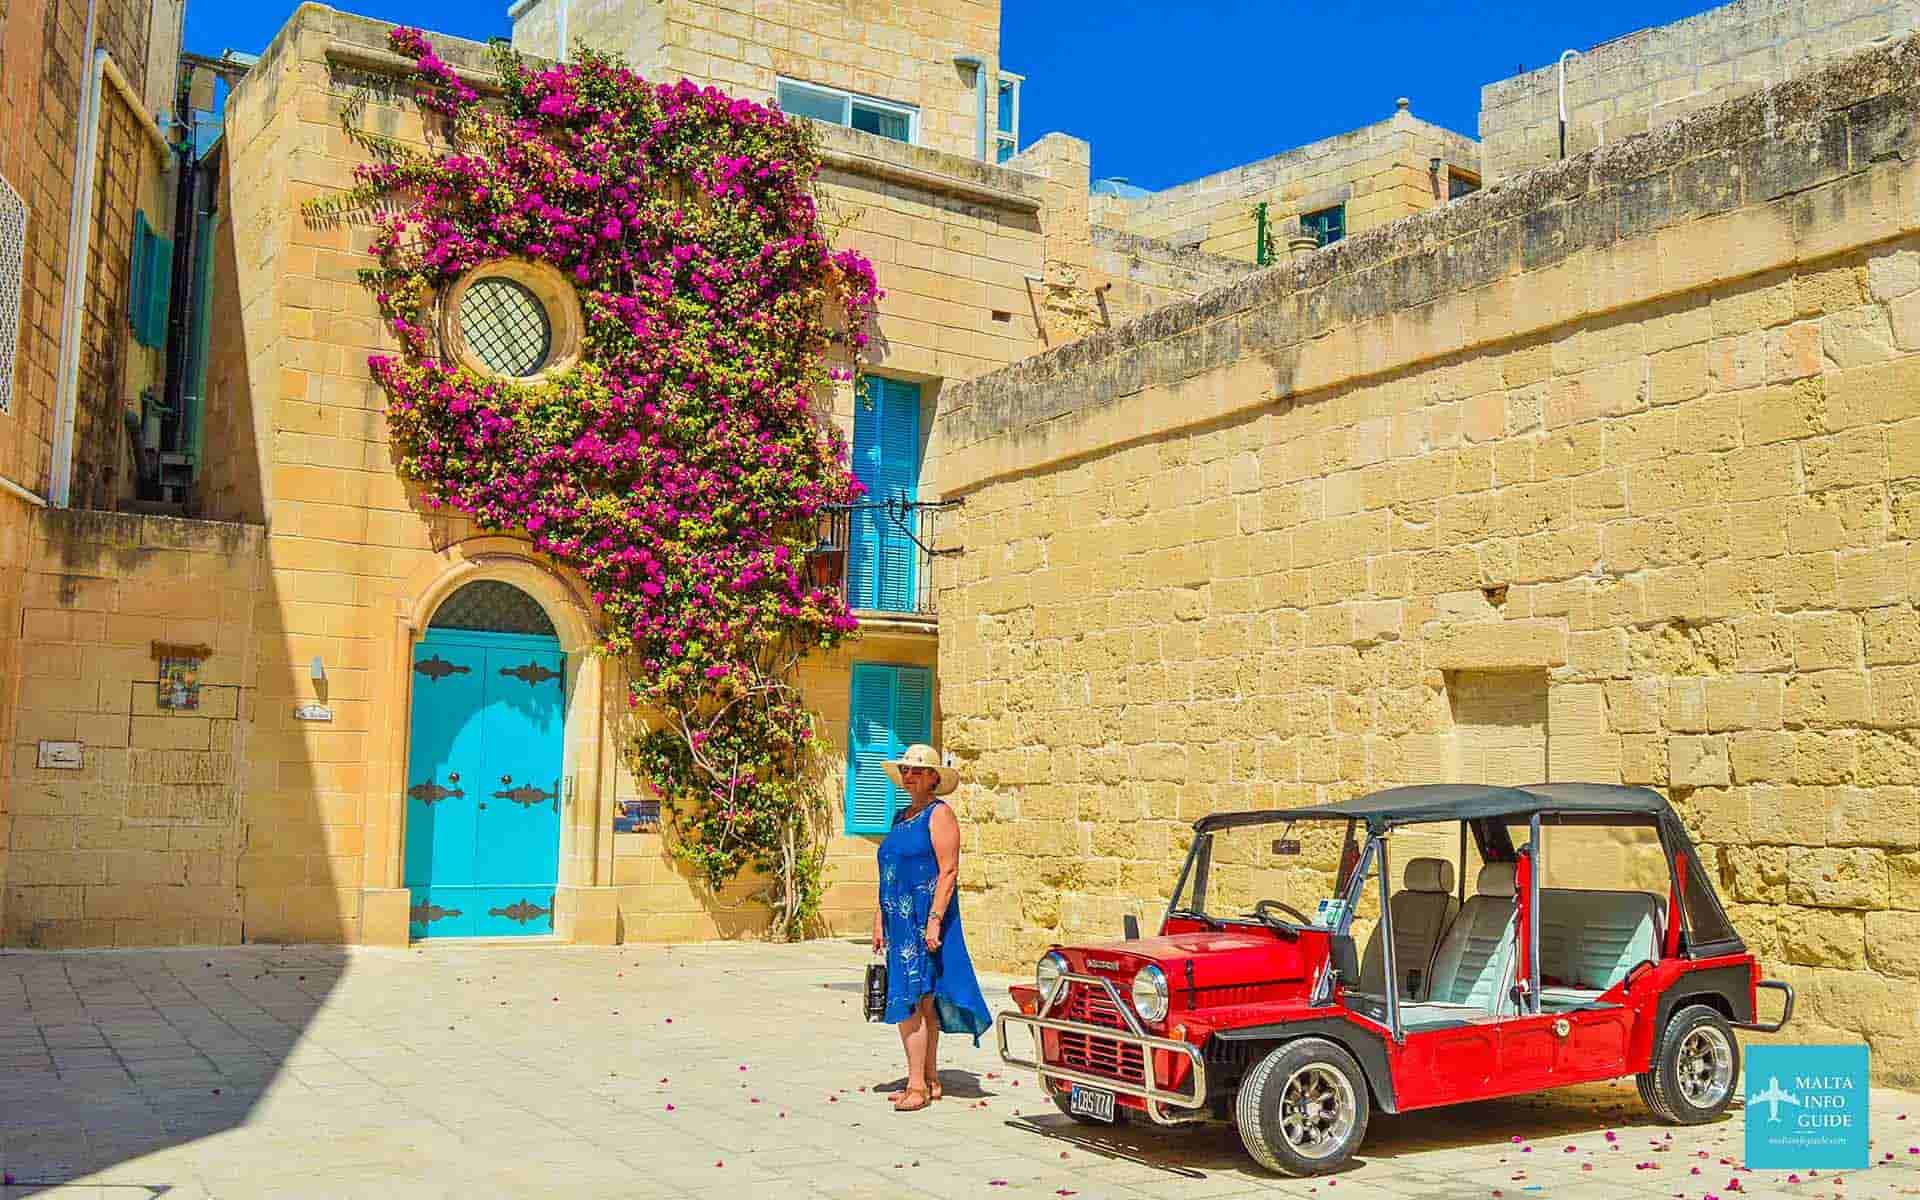 A woman posing in front of a popular Instagrammable house in Mdina Malta.